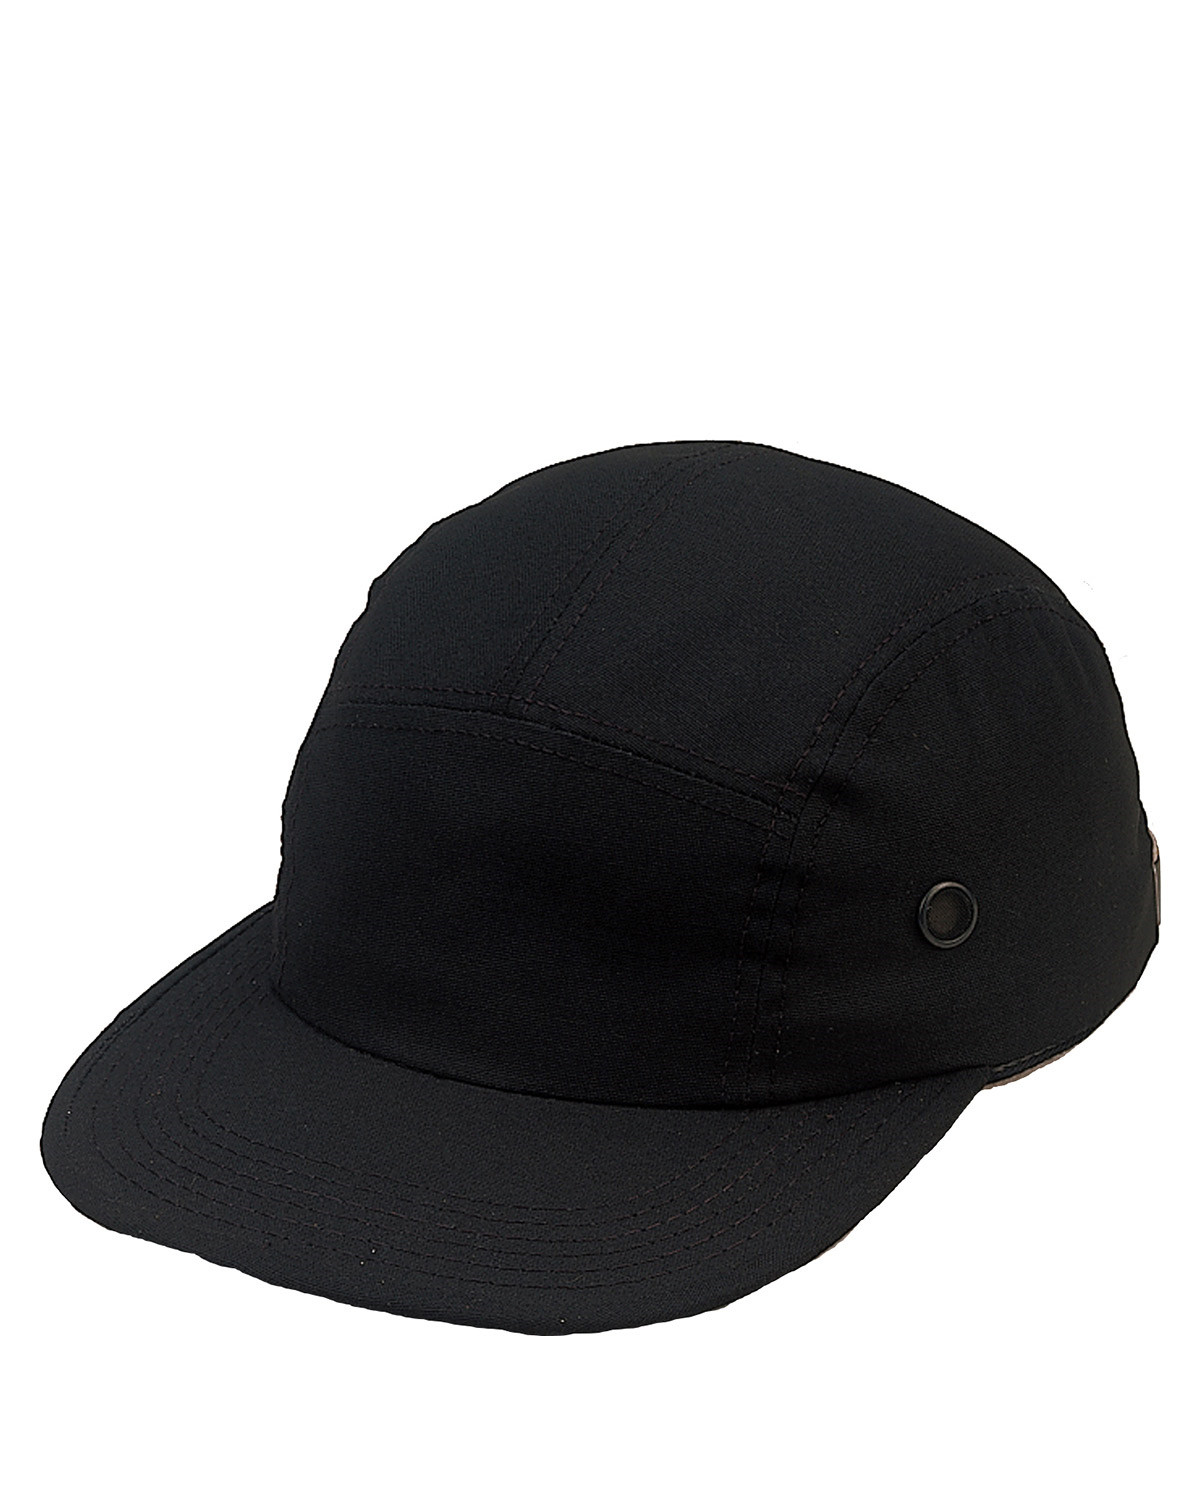 #2 - Rothco 5 Panel Military Street Cap (Sort, One Size)